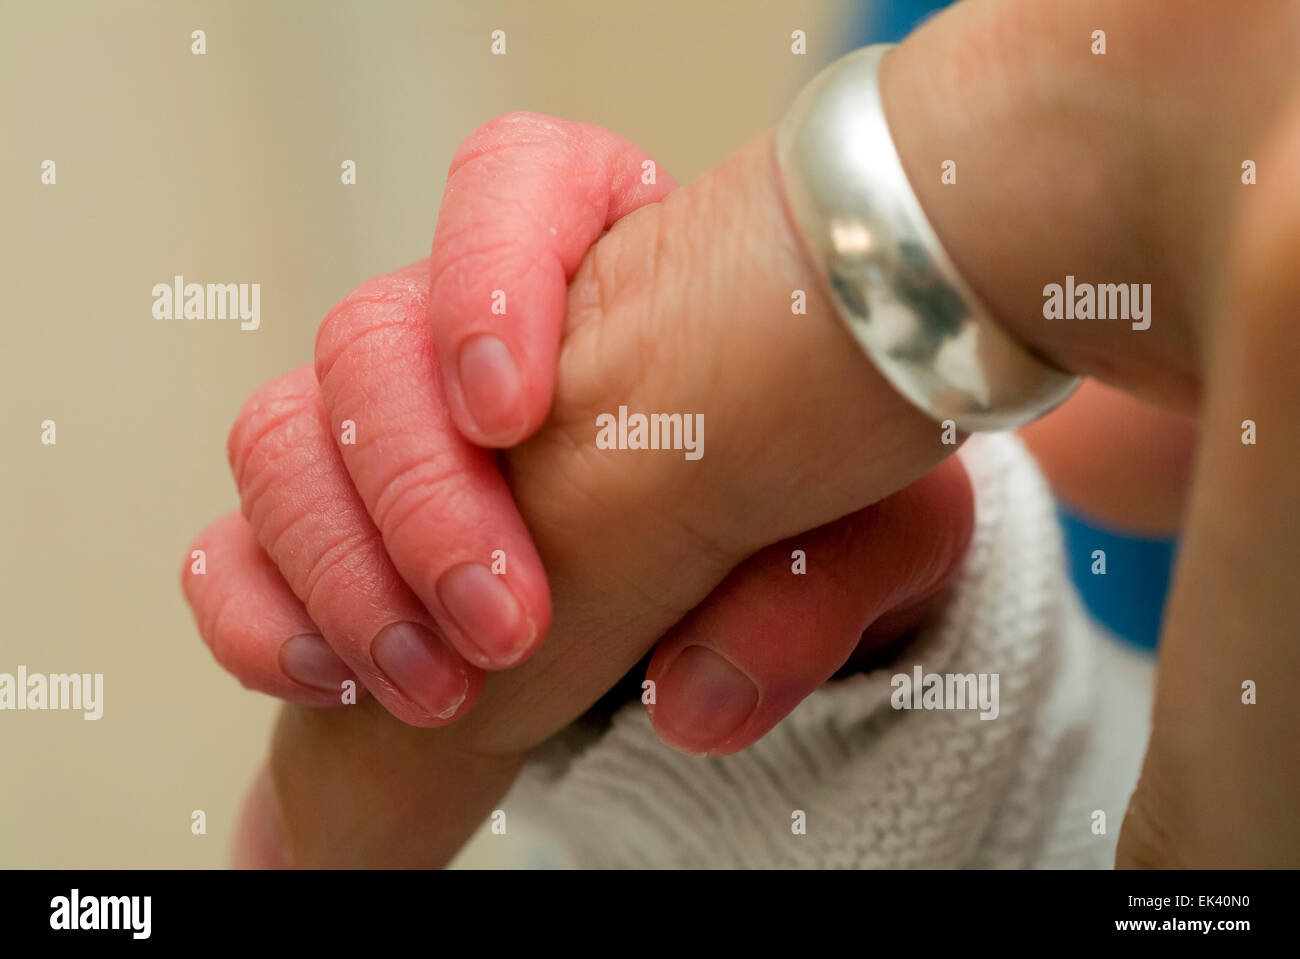 Hand of a newborn baby graps  finger of a parent Stock Photo